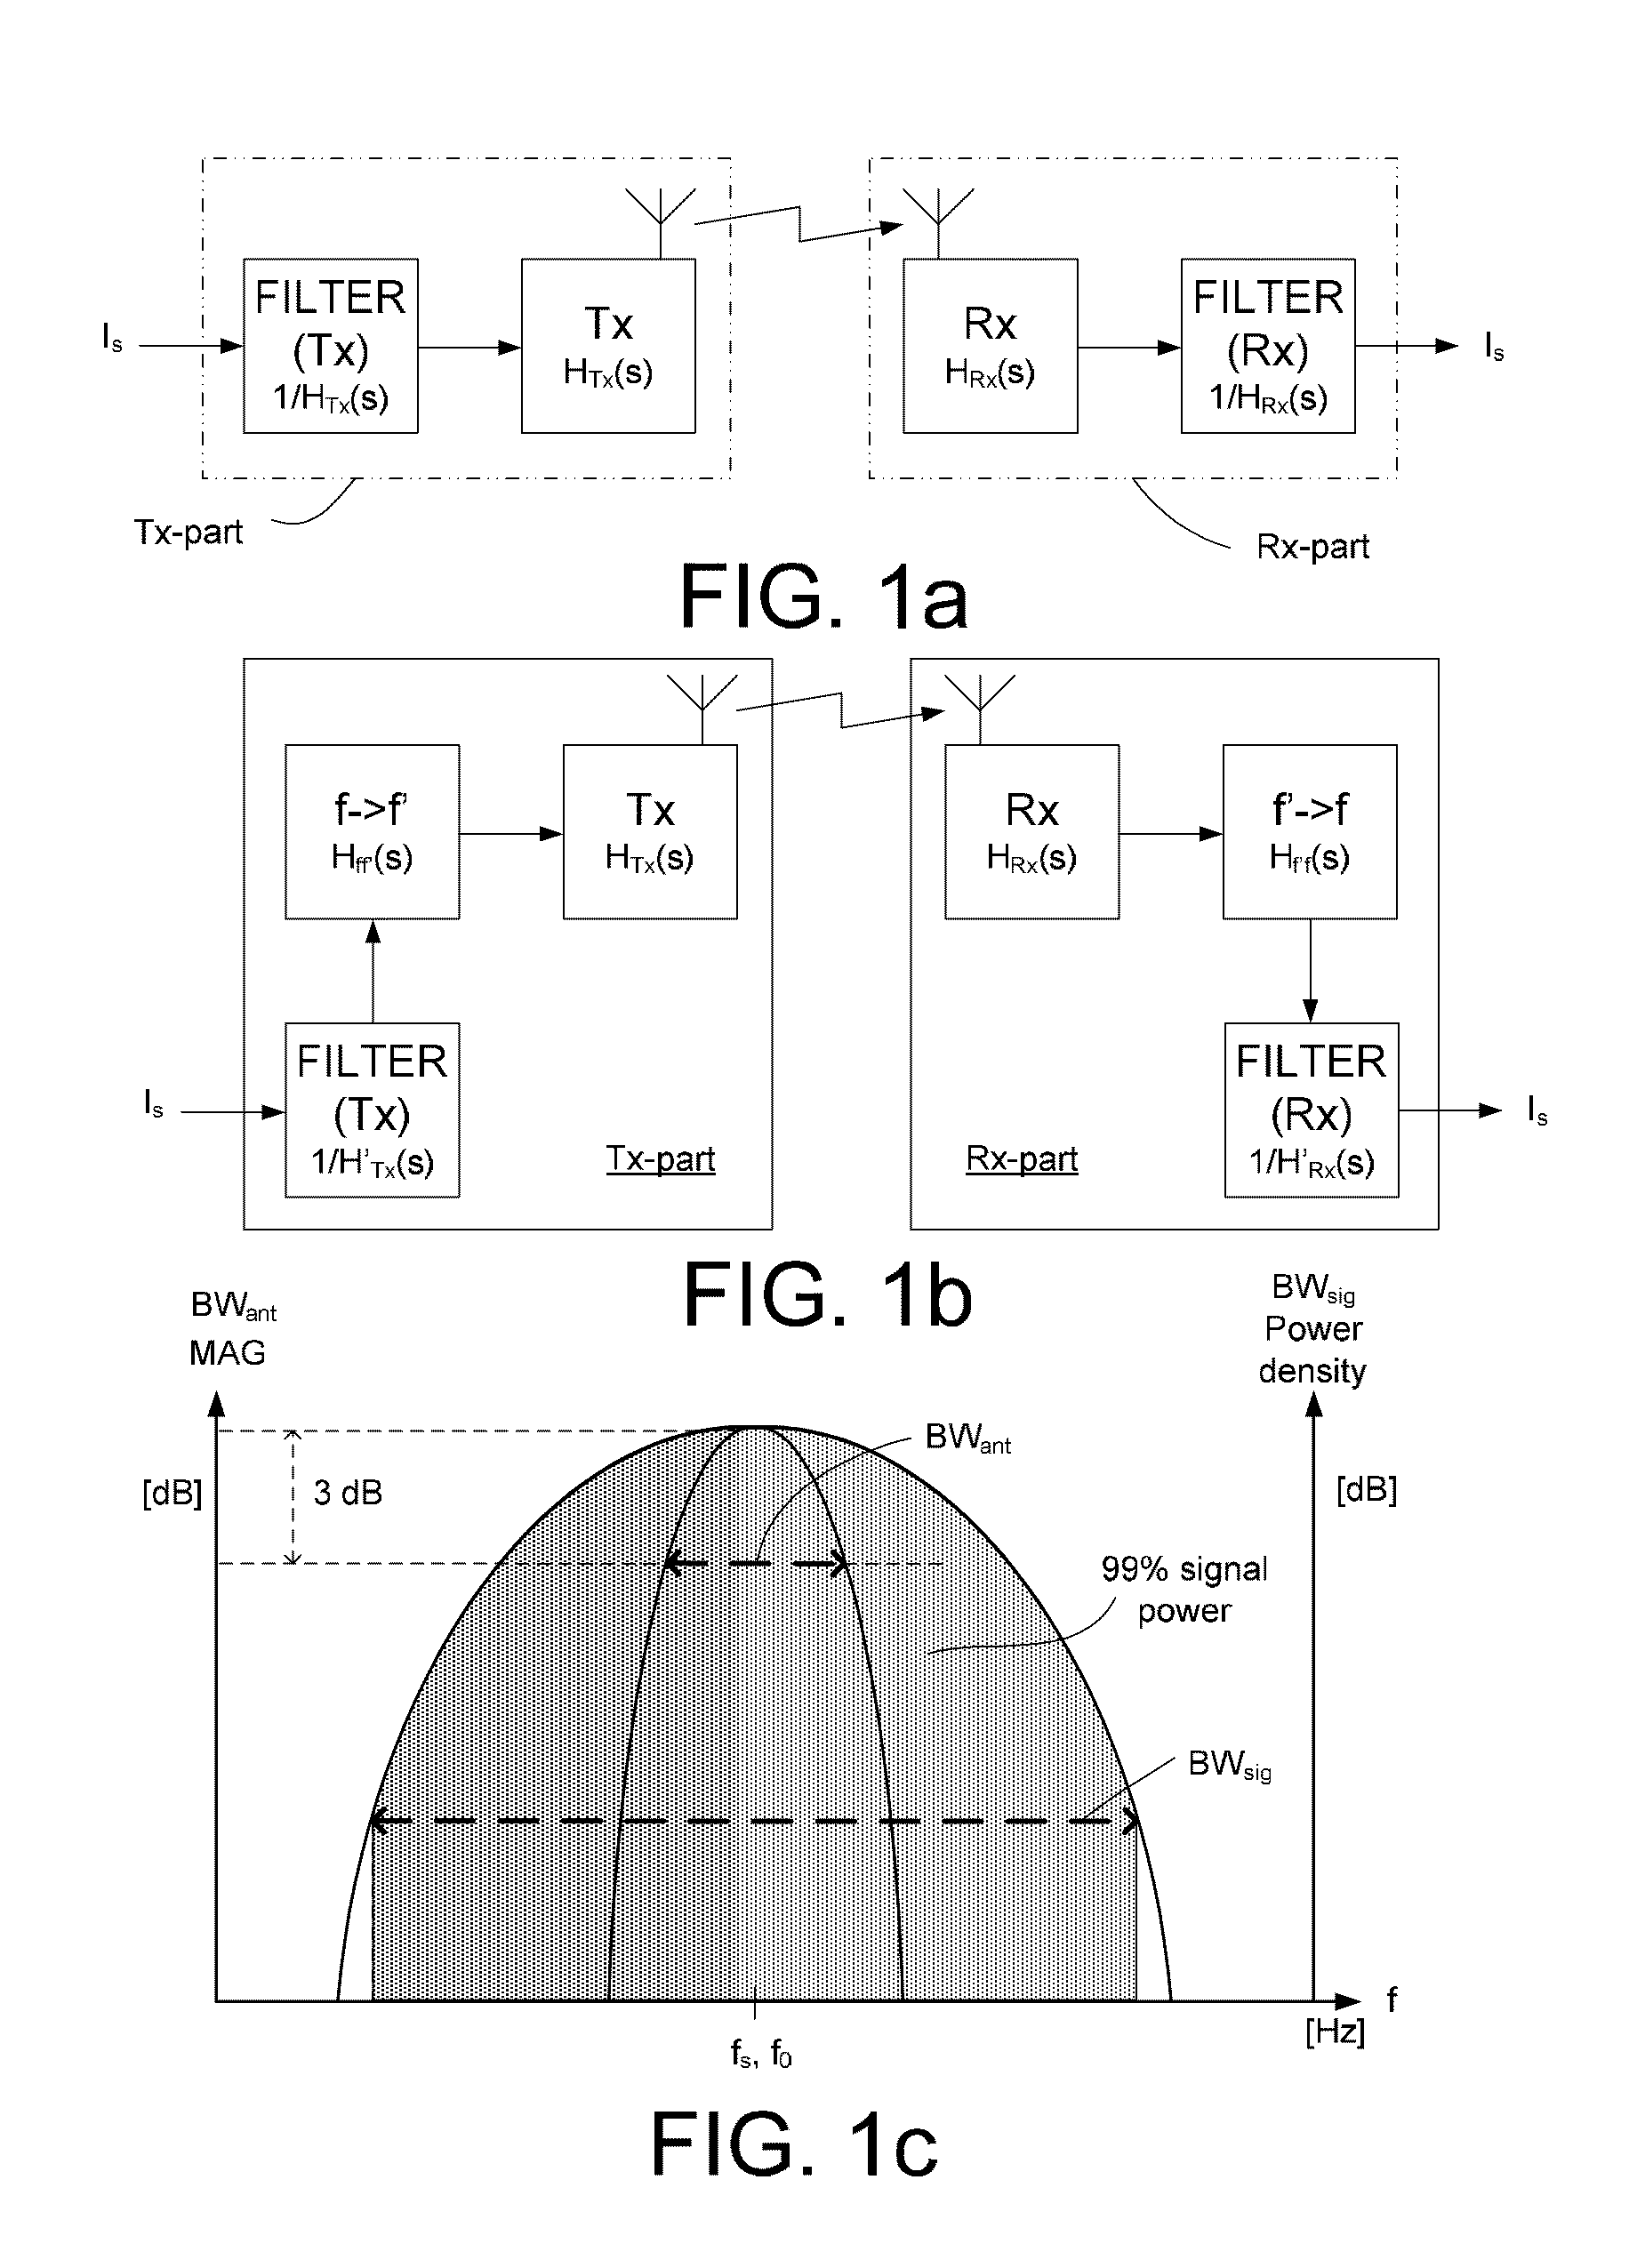 Wireless communication system with a modulation bandwidth comparable to or exceeding the bandwidth of the transmitter and/or receiver antennas